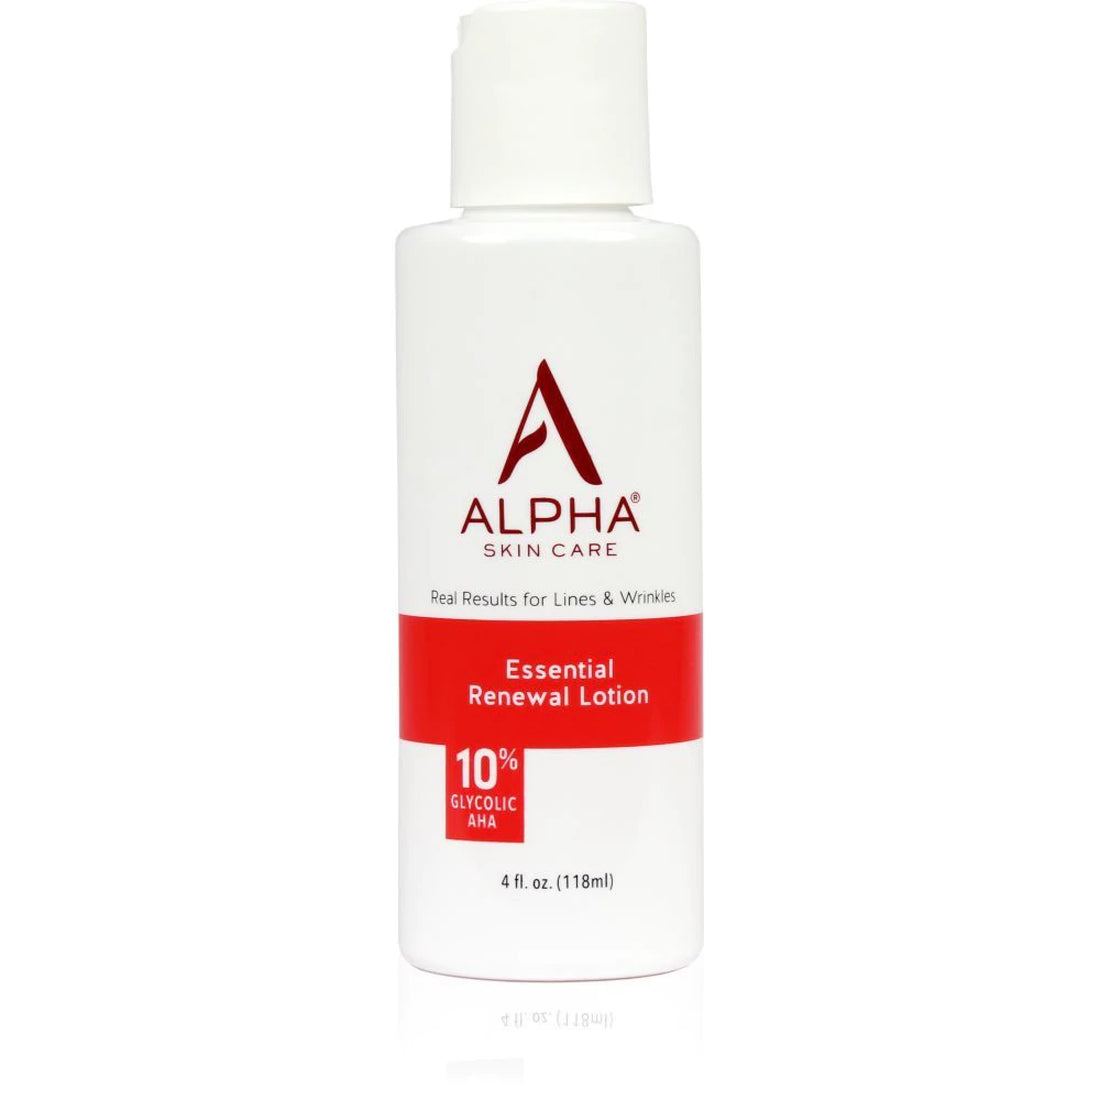 Essential Renewal Lotion with 10% AHA